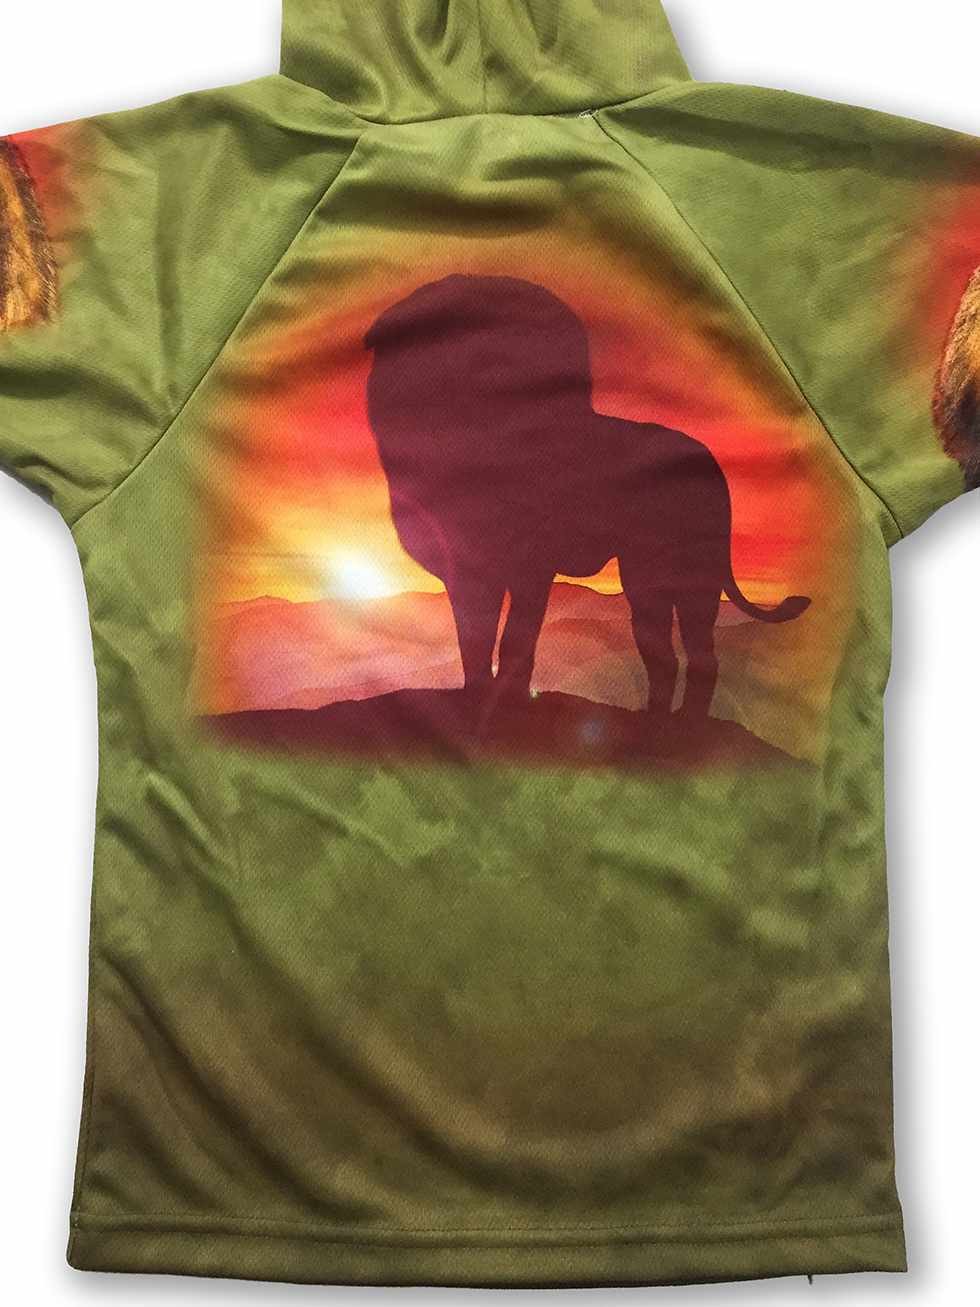 LION JUNGLE KING Sport Shirt by MOUTHMAN® Kid's Clothing 